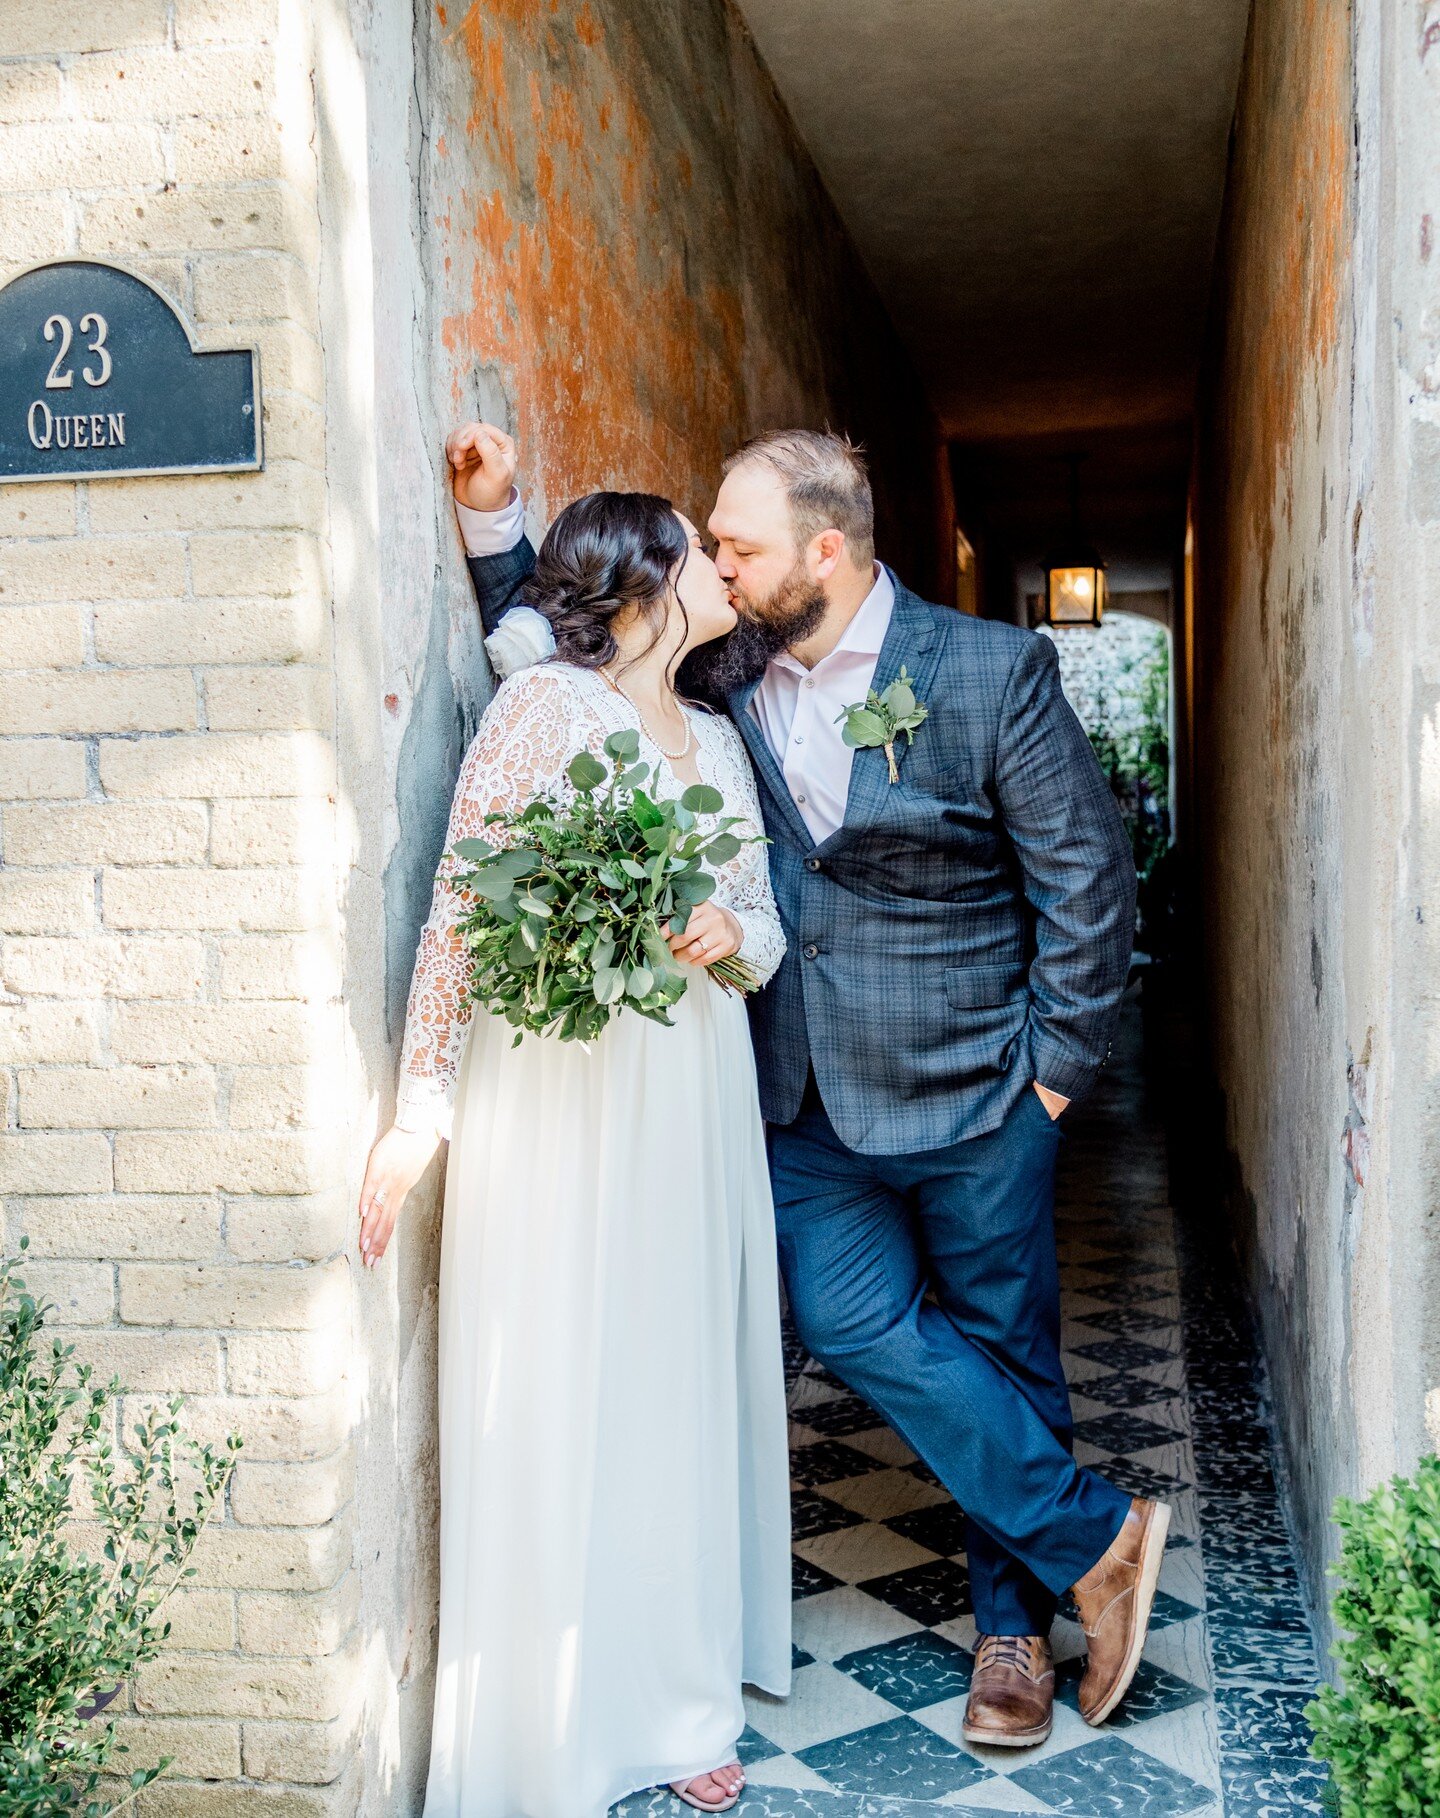 So many congratulations to Cassie + Colton! It was so fun walking downtown to find romantic nooks with you after your gorgeous elopement ceremony at I'On Chapel!
.
.
Planning: @simplyeloped 
Photography: @livewilderstudio 
Ceremony Venue: @ionchapel 